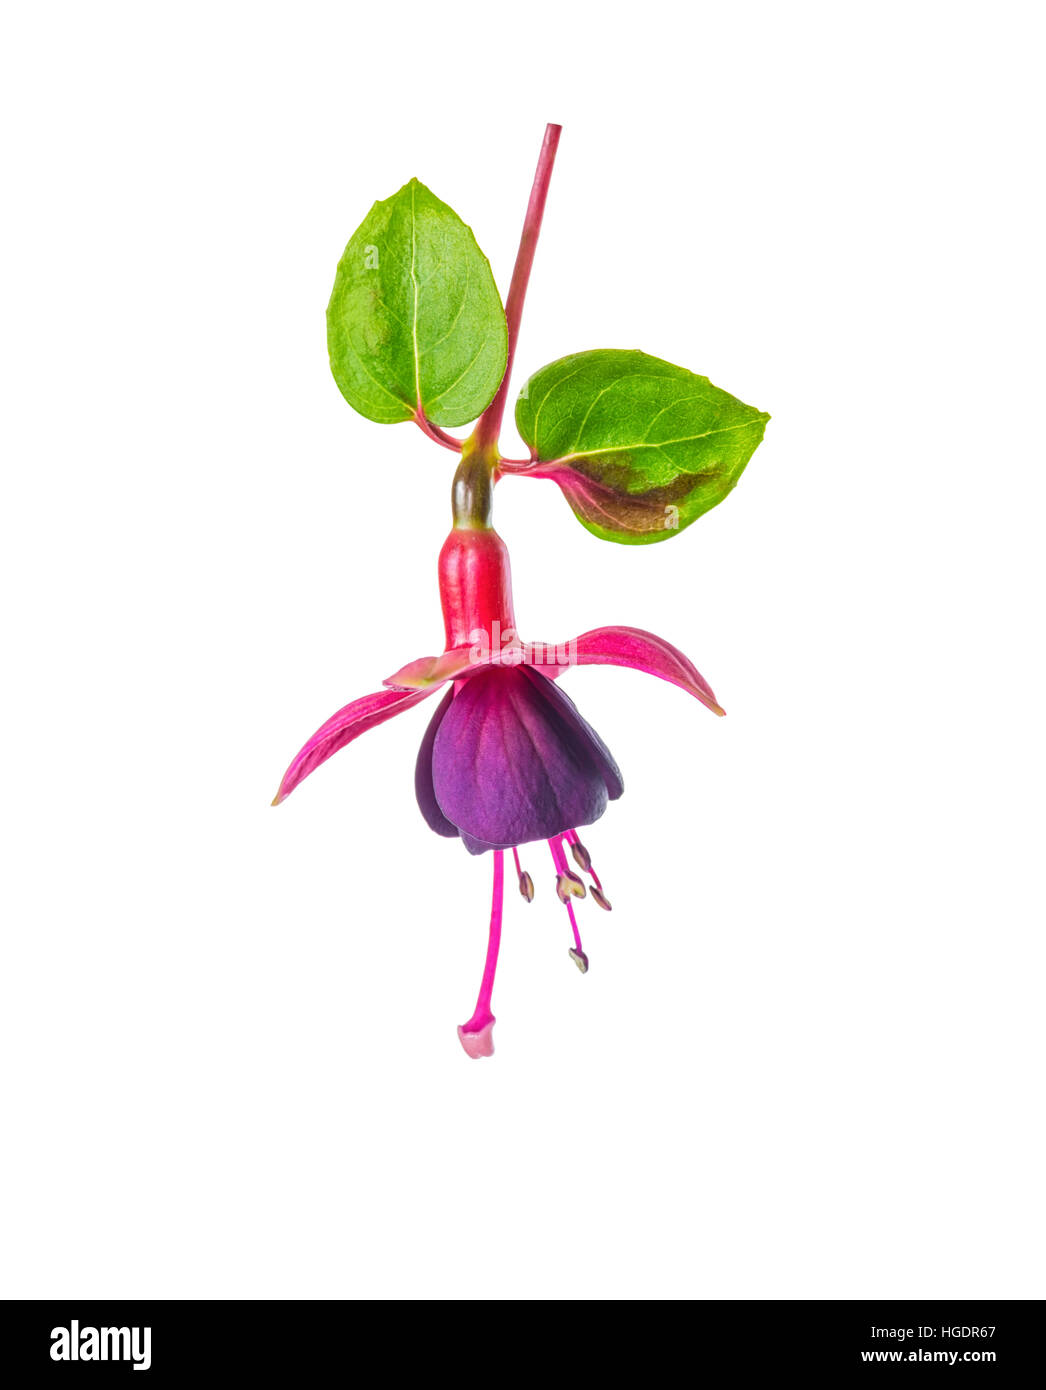 blooming beautiful flower in shades of red and purple fuchsia with leaves is isolated on white background, ` Huet’s Kwarts`, close up Stock Photo